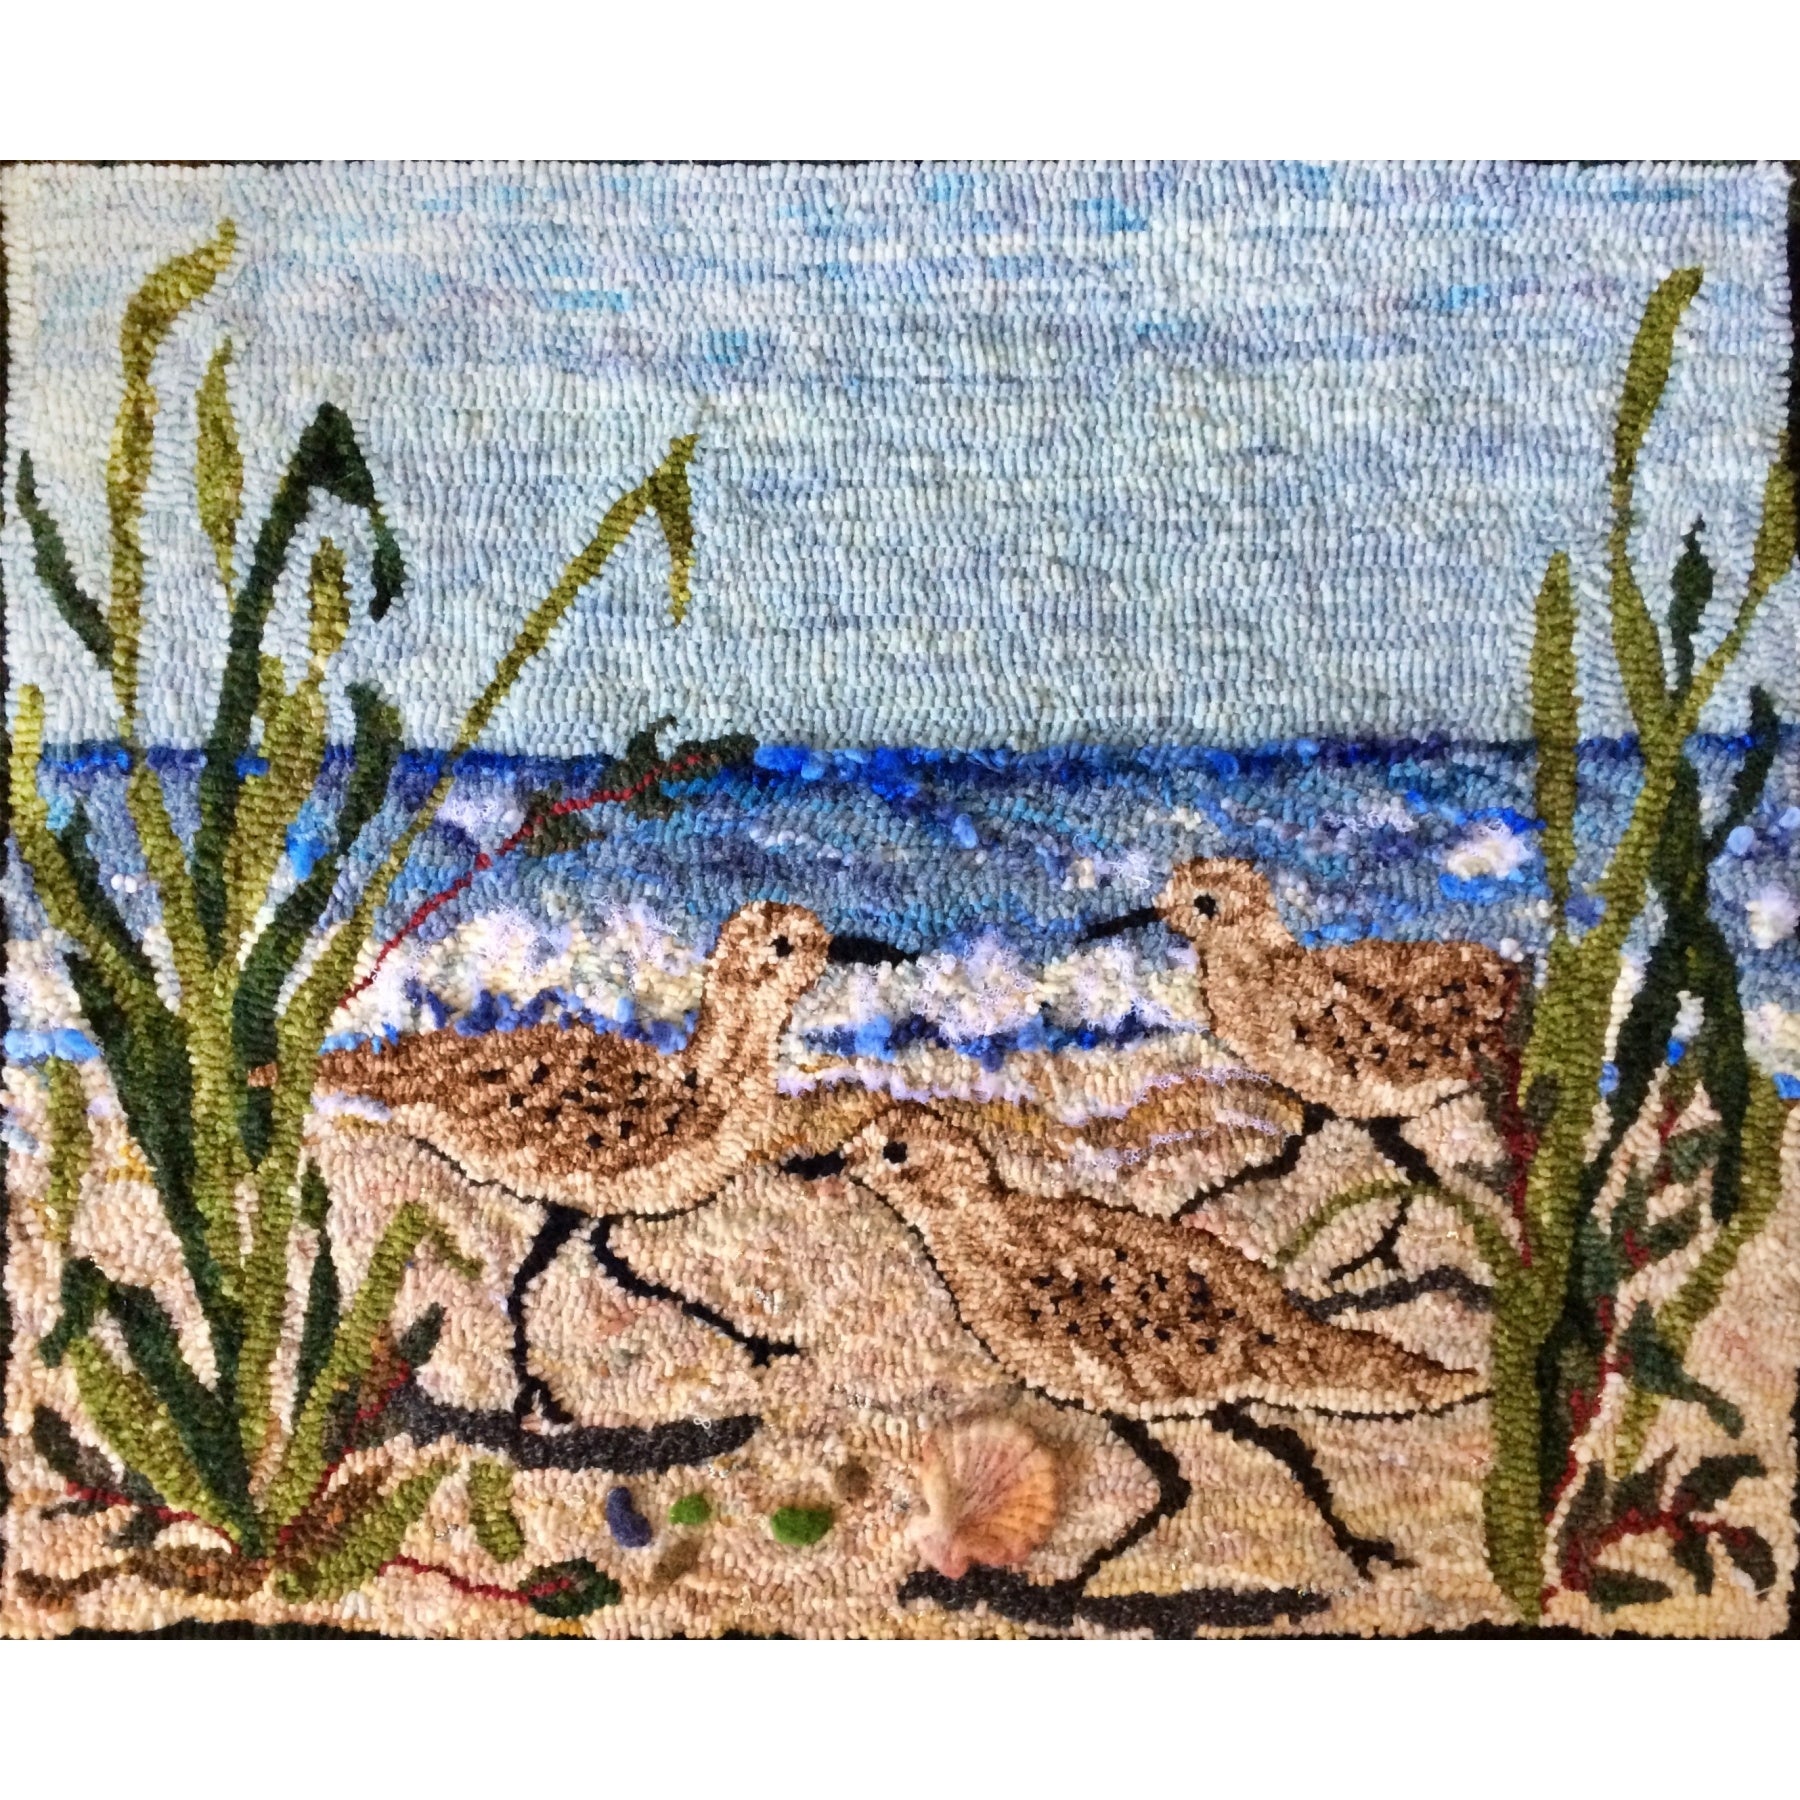 Sandpipers, rug hooked by Betsy Engel